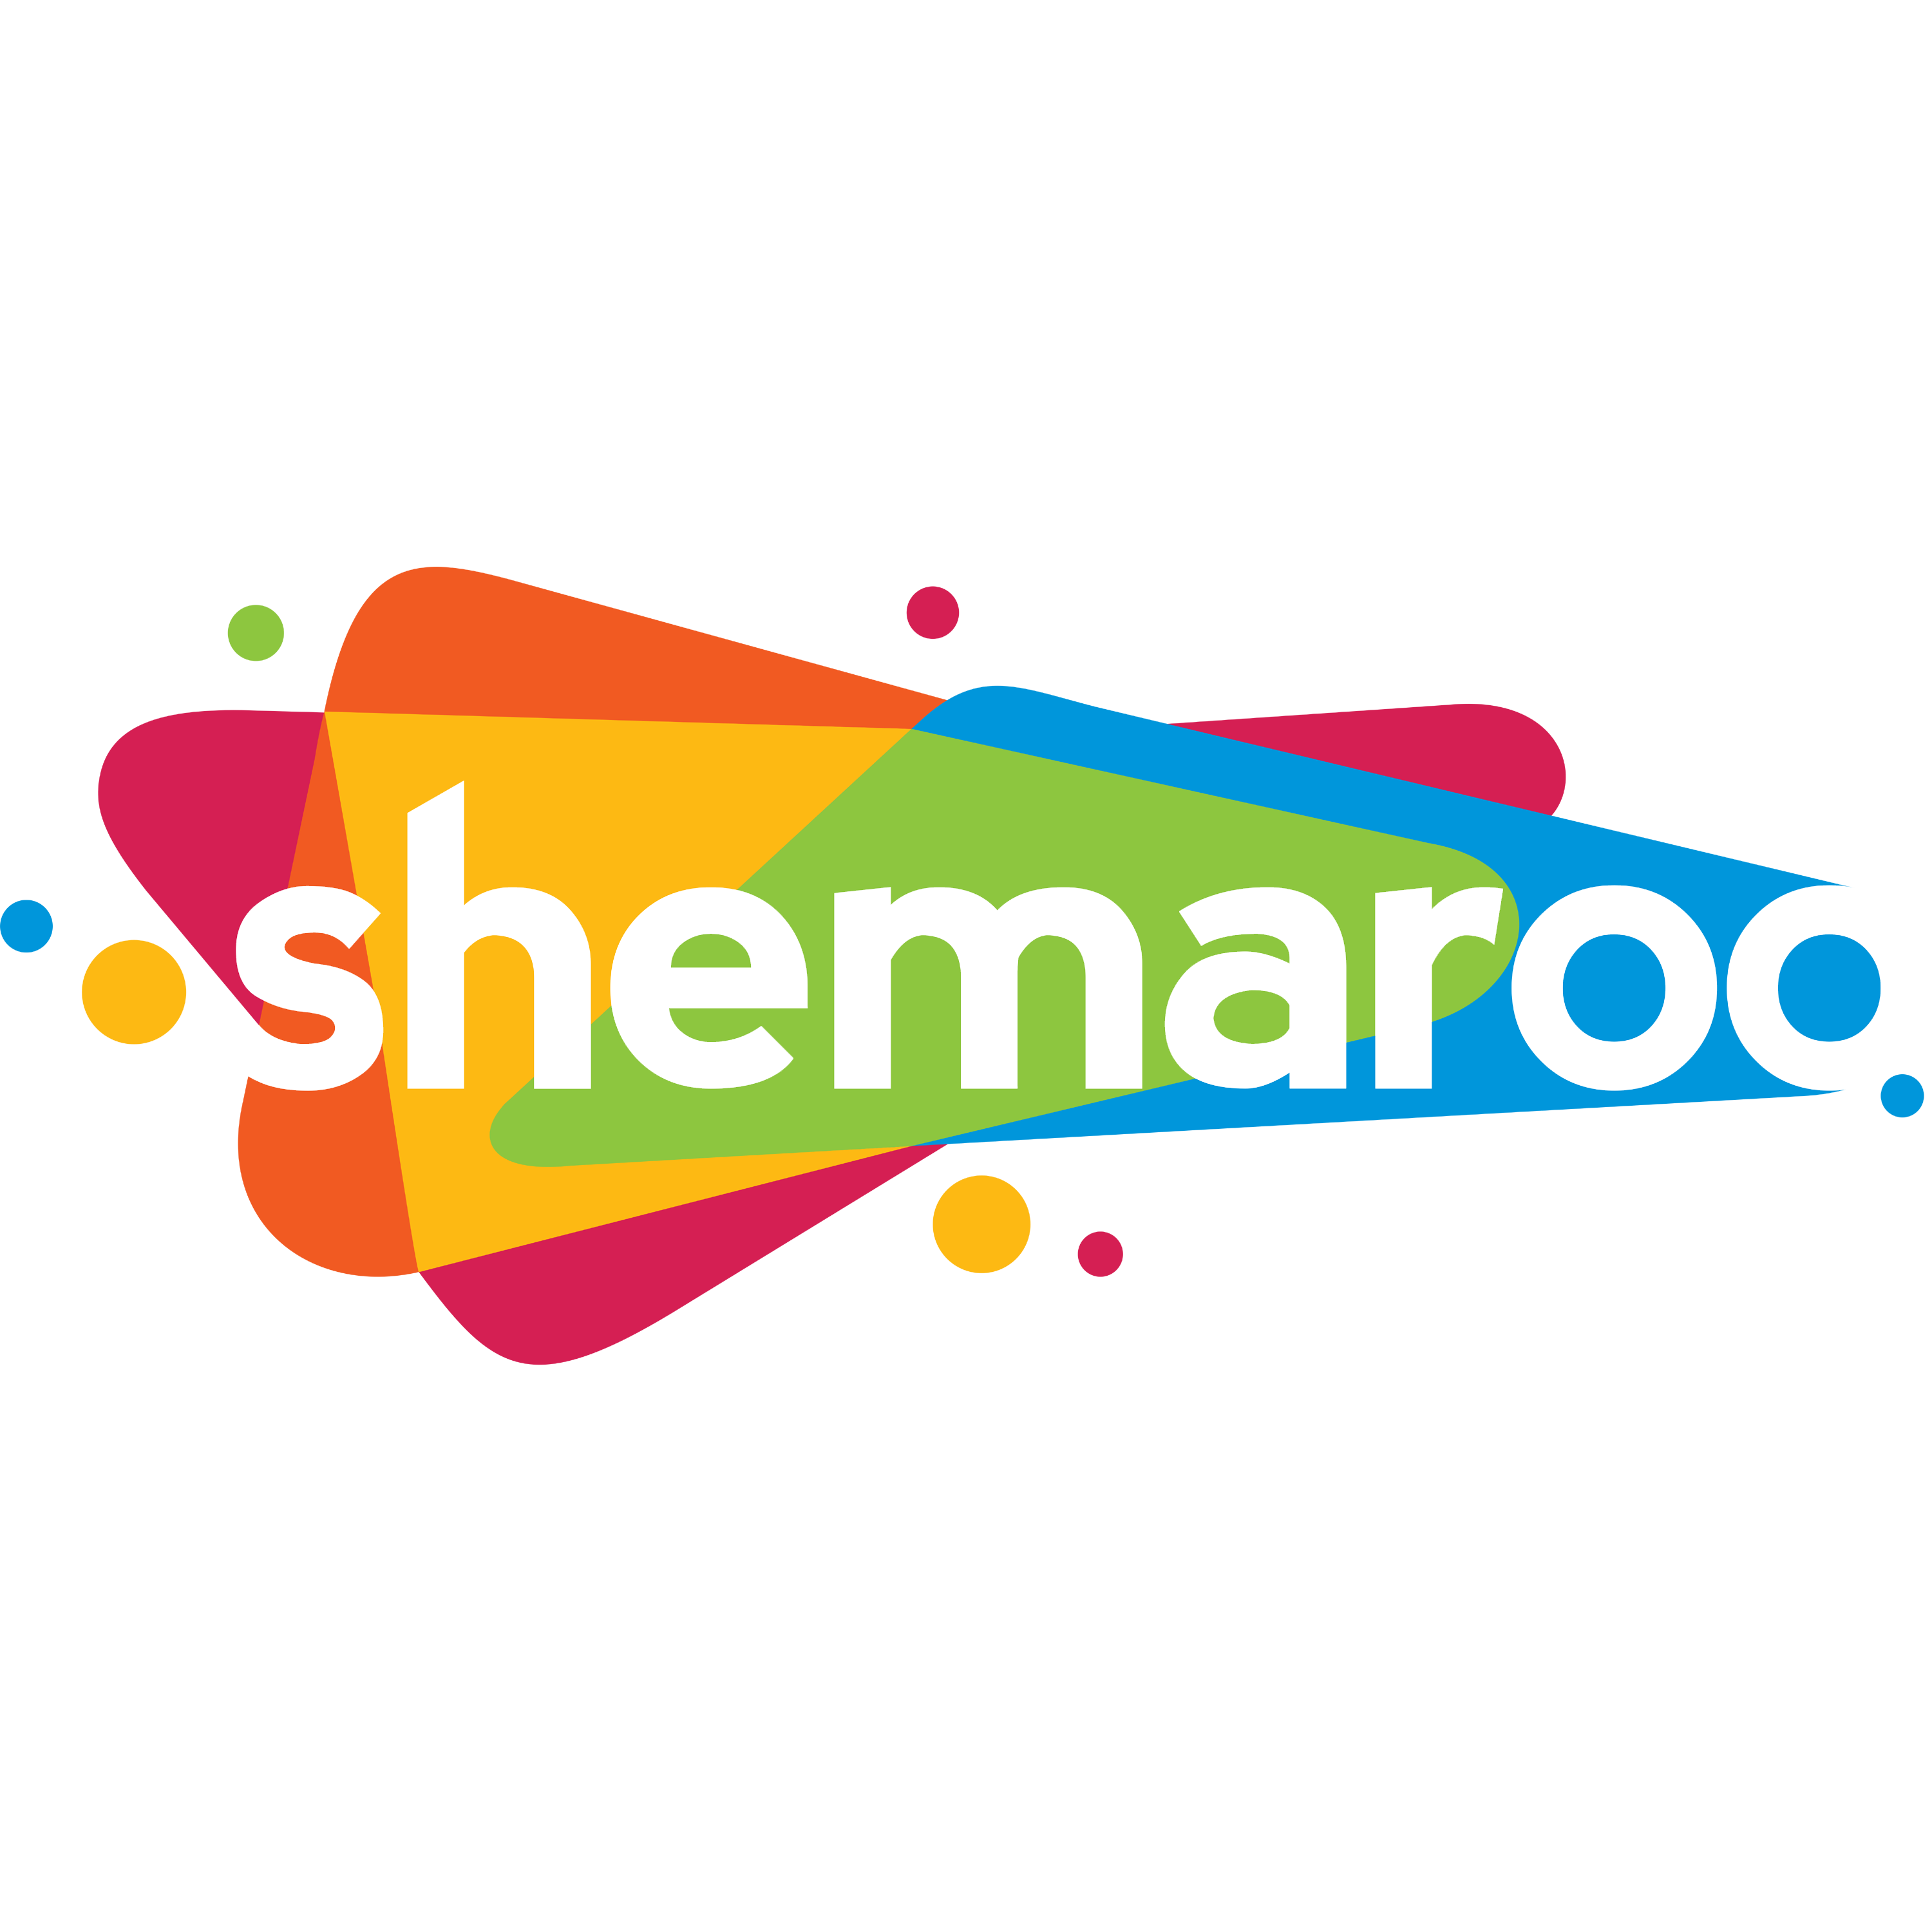 Shemaroo Logo Transparent Picture